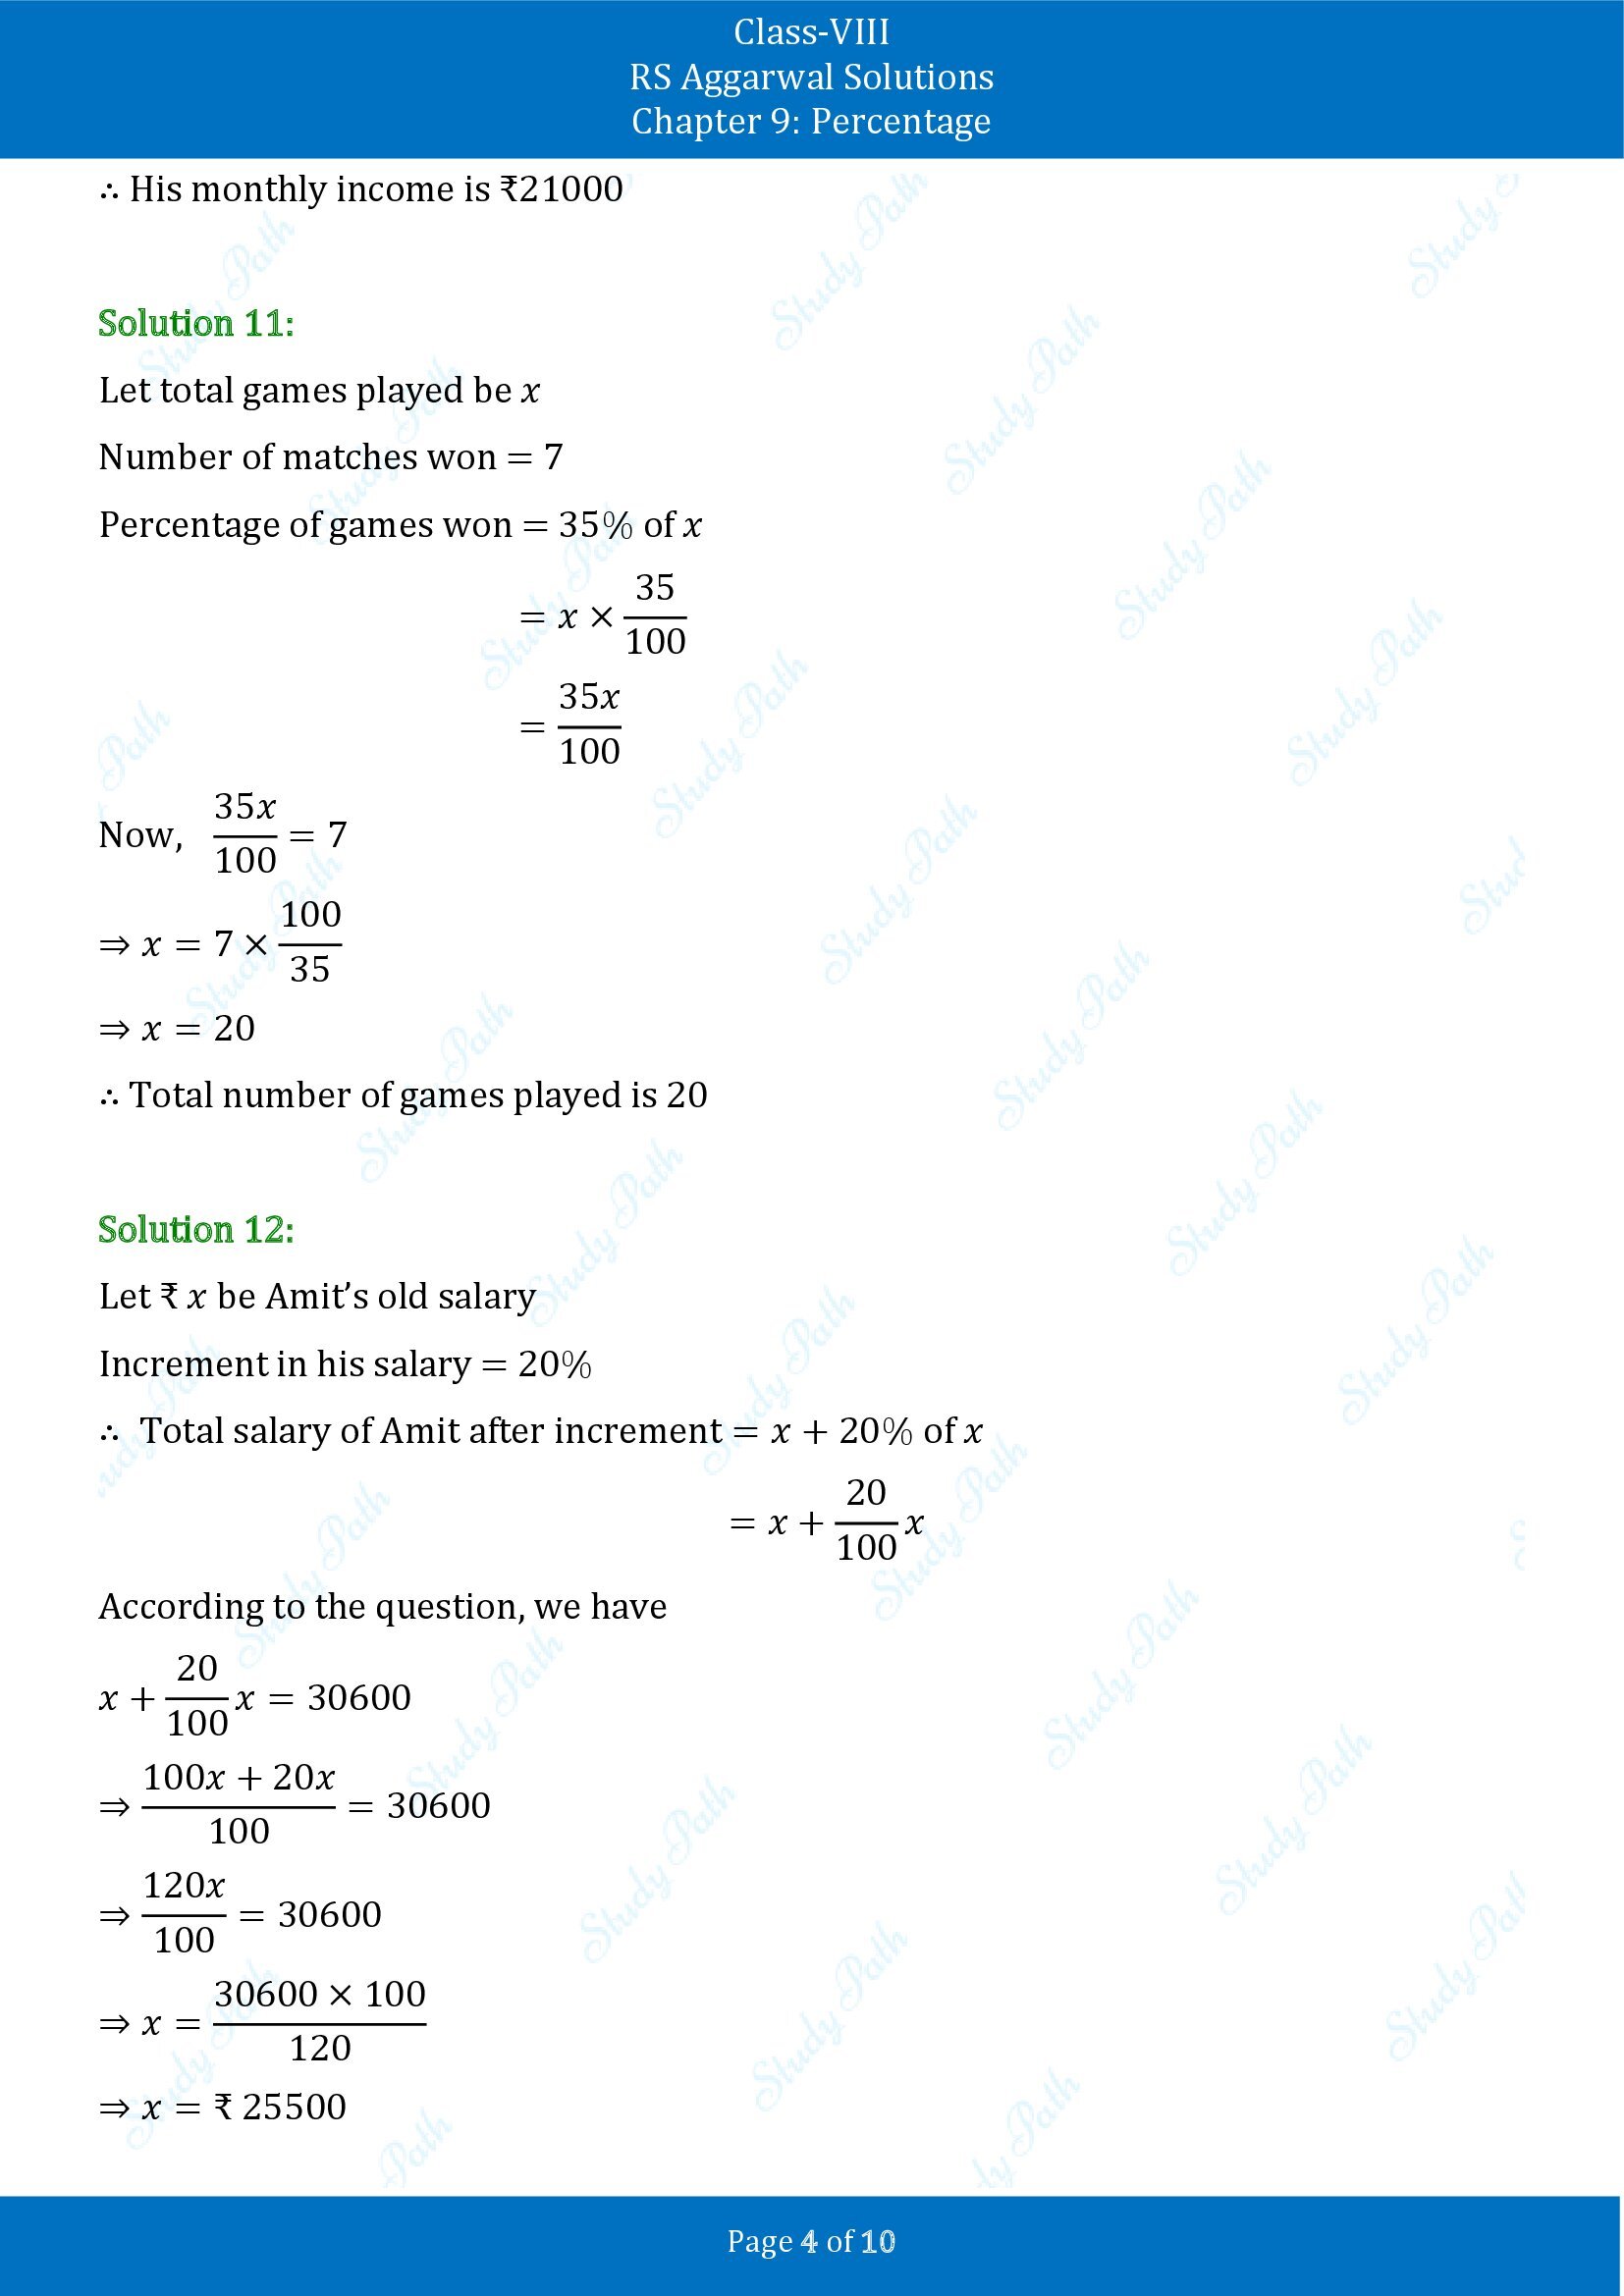 RS Aggarwal Solutions Class 8 Chapter 9 Percentage Exercise 9A 00004